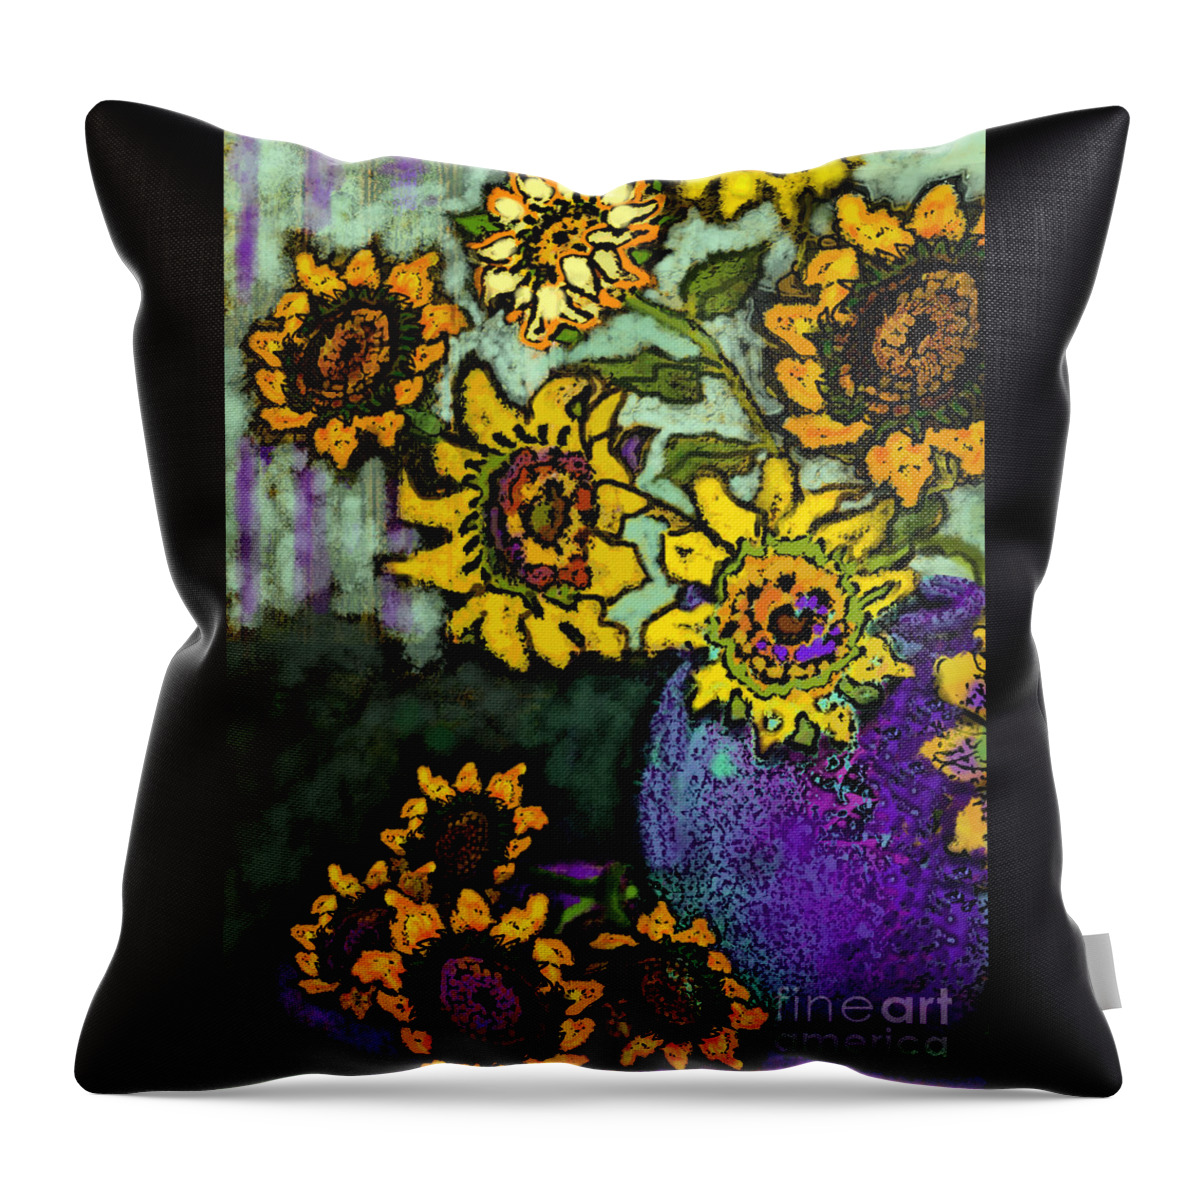 Vincent Throw Pillow featuring the digital art Van Gogh Sunflowers Cover by Carol Jacobs